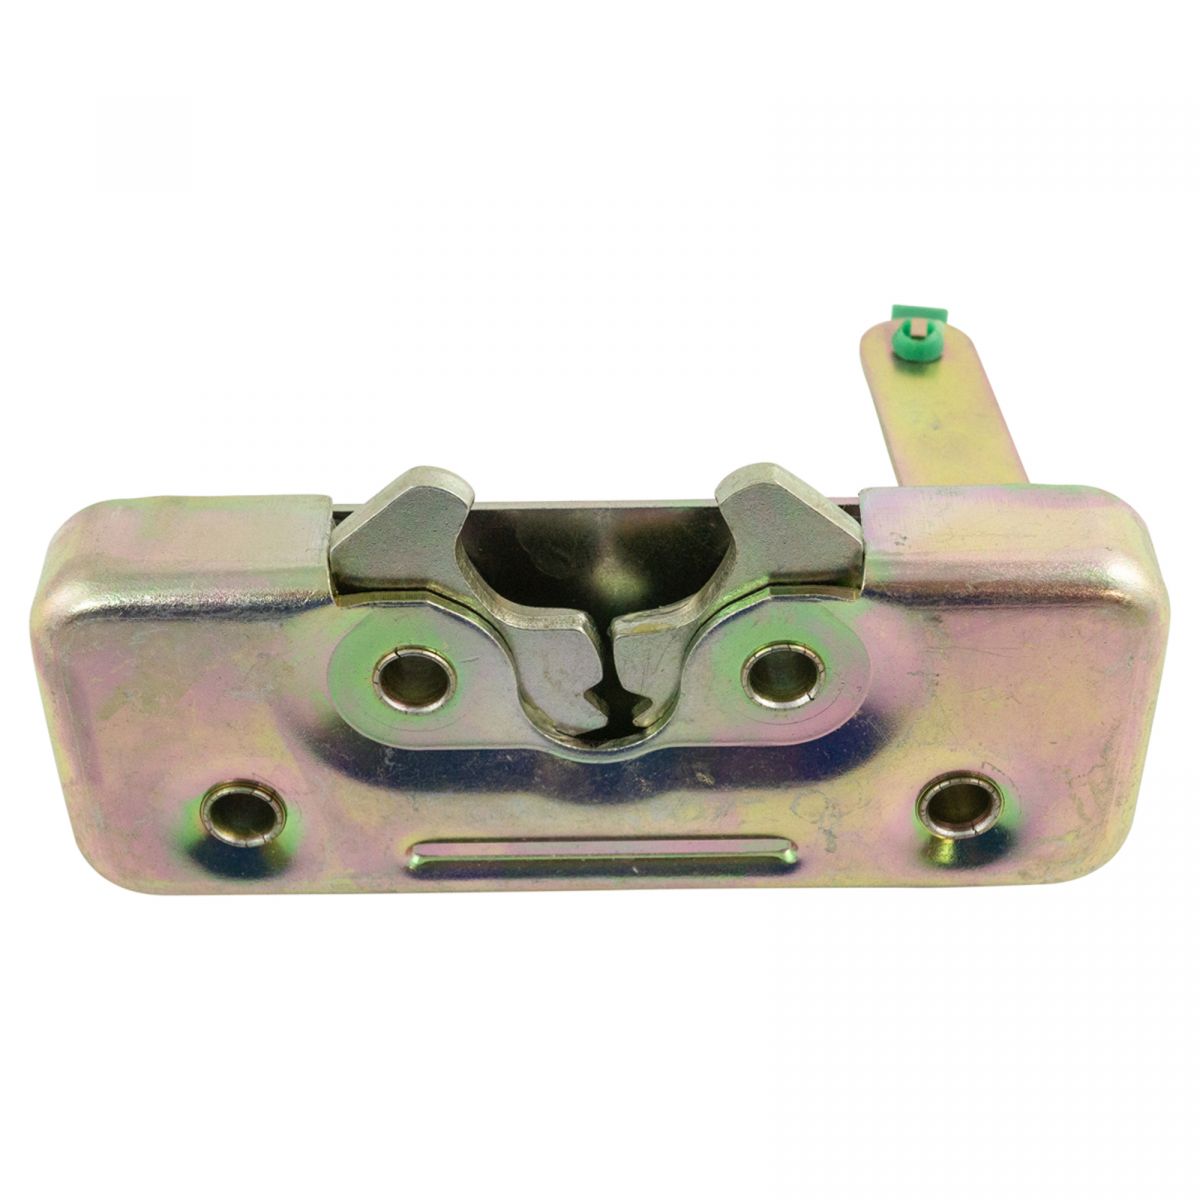 Details About Front Upper Door Latch Lh Driver Side For Freightliner Fld Columbia Century New